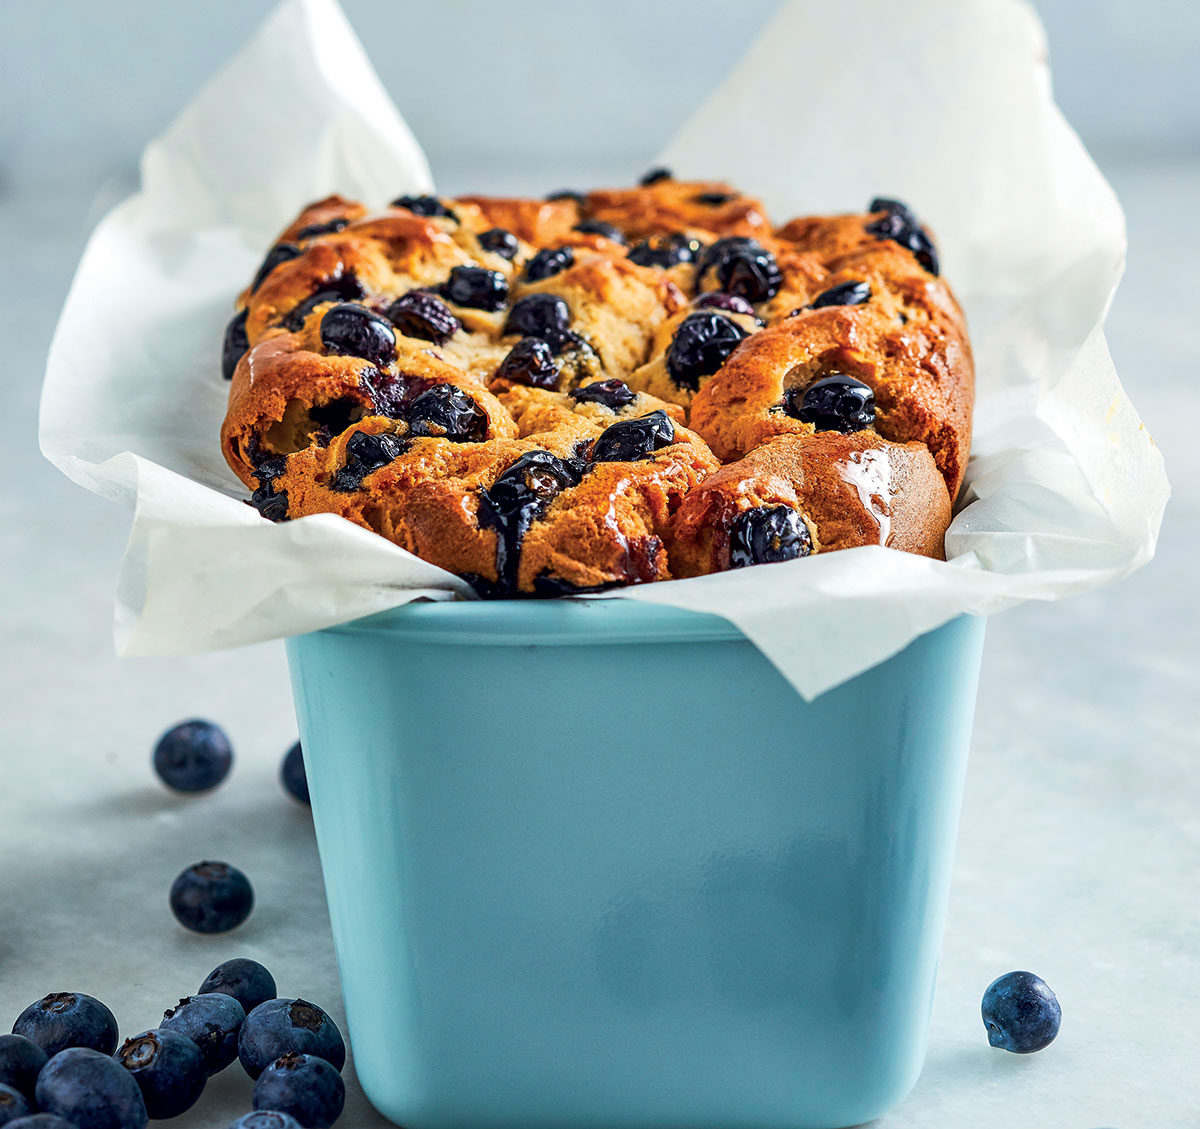 Peanut butter-and-blueberry loaf recipe